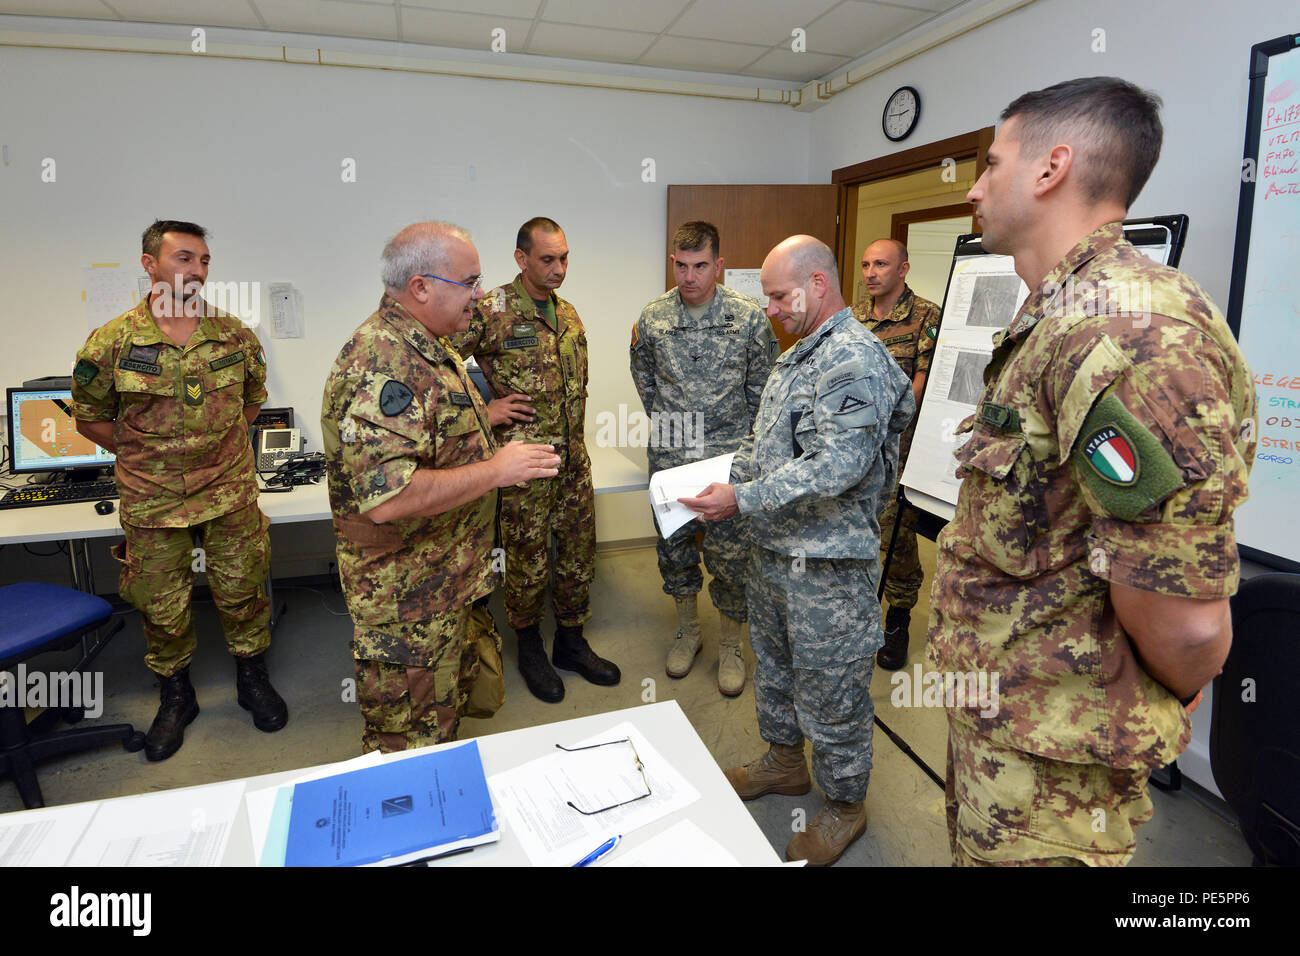 Brig. Gen. Salvatore Polimeno, commander of CE.SI.VA and Brig. Gen. Christopher G. Cavoli, commander of the 7th Army Joint Multinational Training Command, talk about NIE 16.1 (Network Integration Evaluation 16.1) exercise with U.S. and Italian Soldiers at Caserma Ederle Vicenza, Italy, Sept. 28, 2015. The NIE 16.1 is a multi-nation exercise designed to increase interoperability and communication between U.S. and NATO Friendly Force. (U.S. Army photo by Visual Information Specialist Paolo Bovo/released) Stock Photo